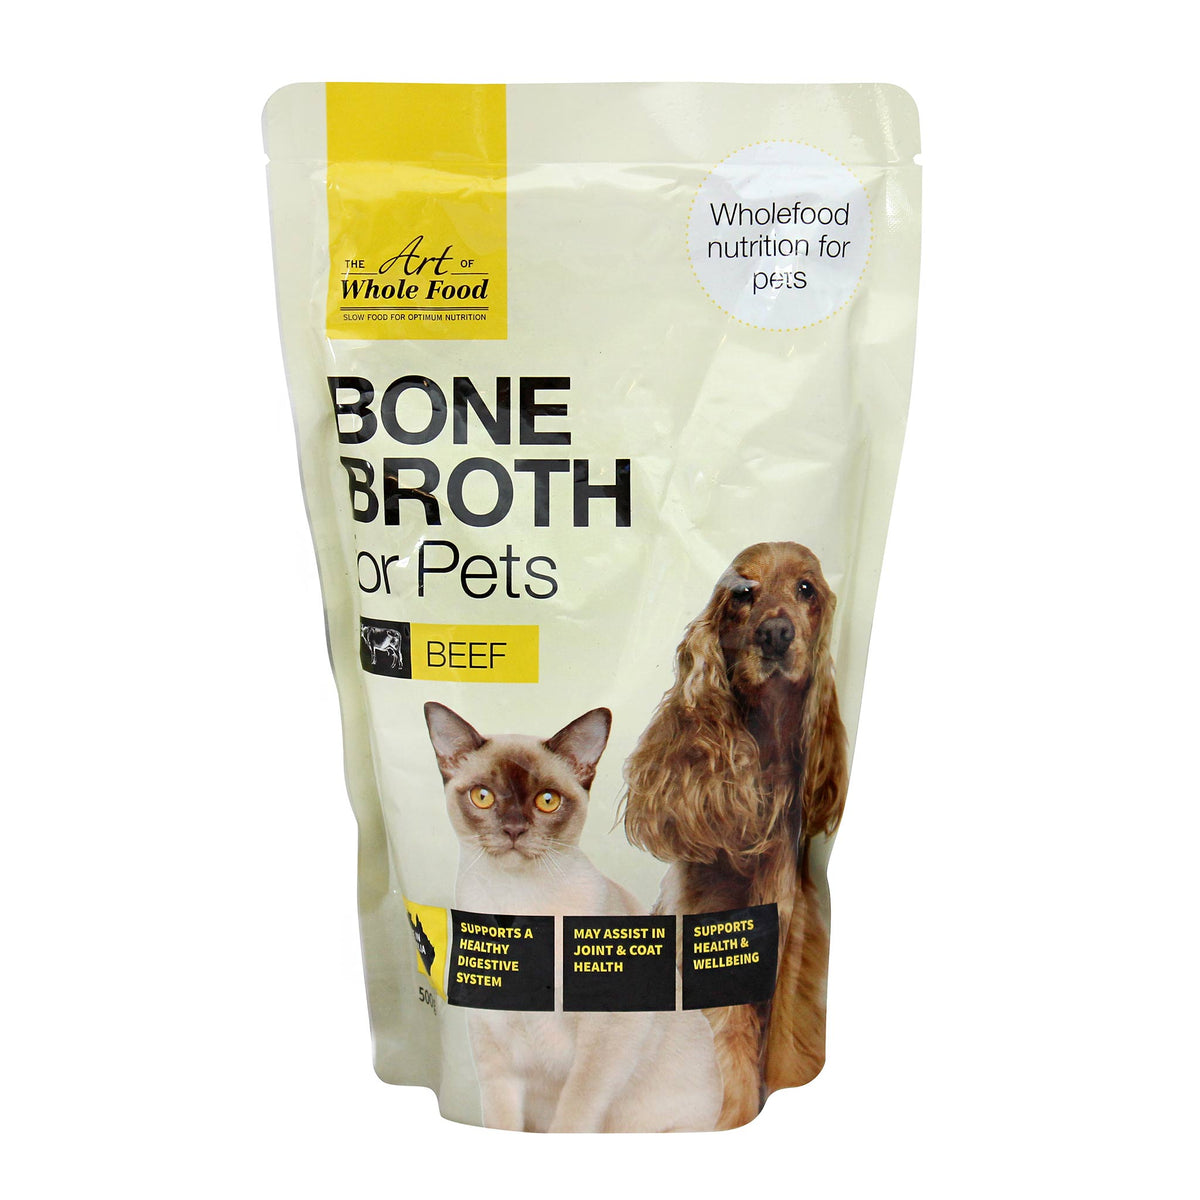 The Art of Whole Food Beef Bone Broth for Pets 500g